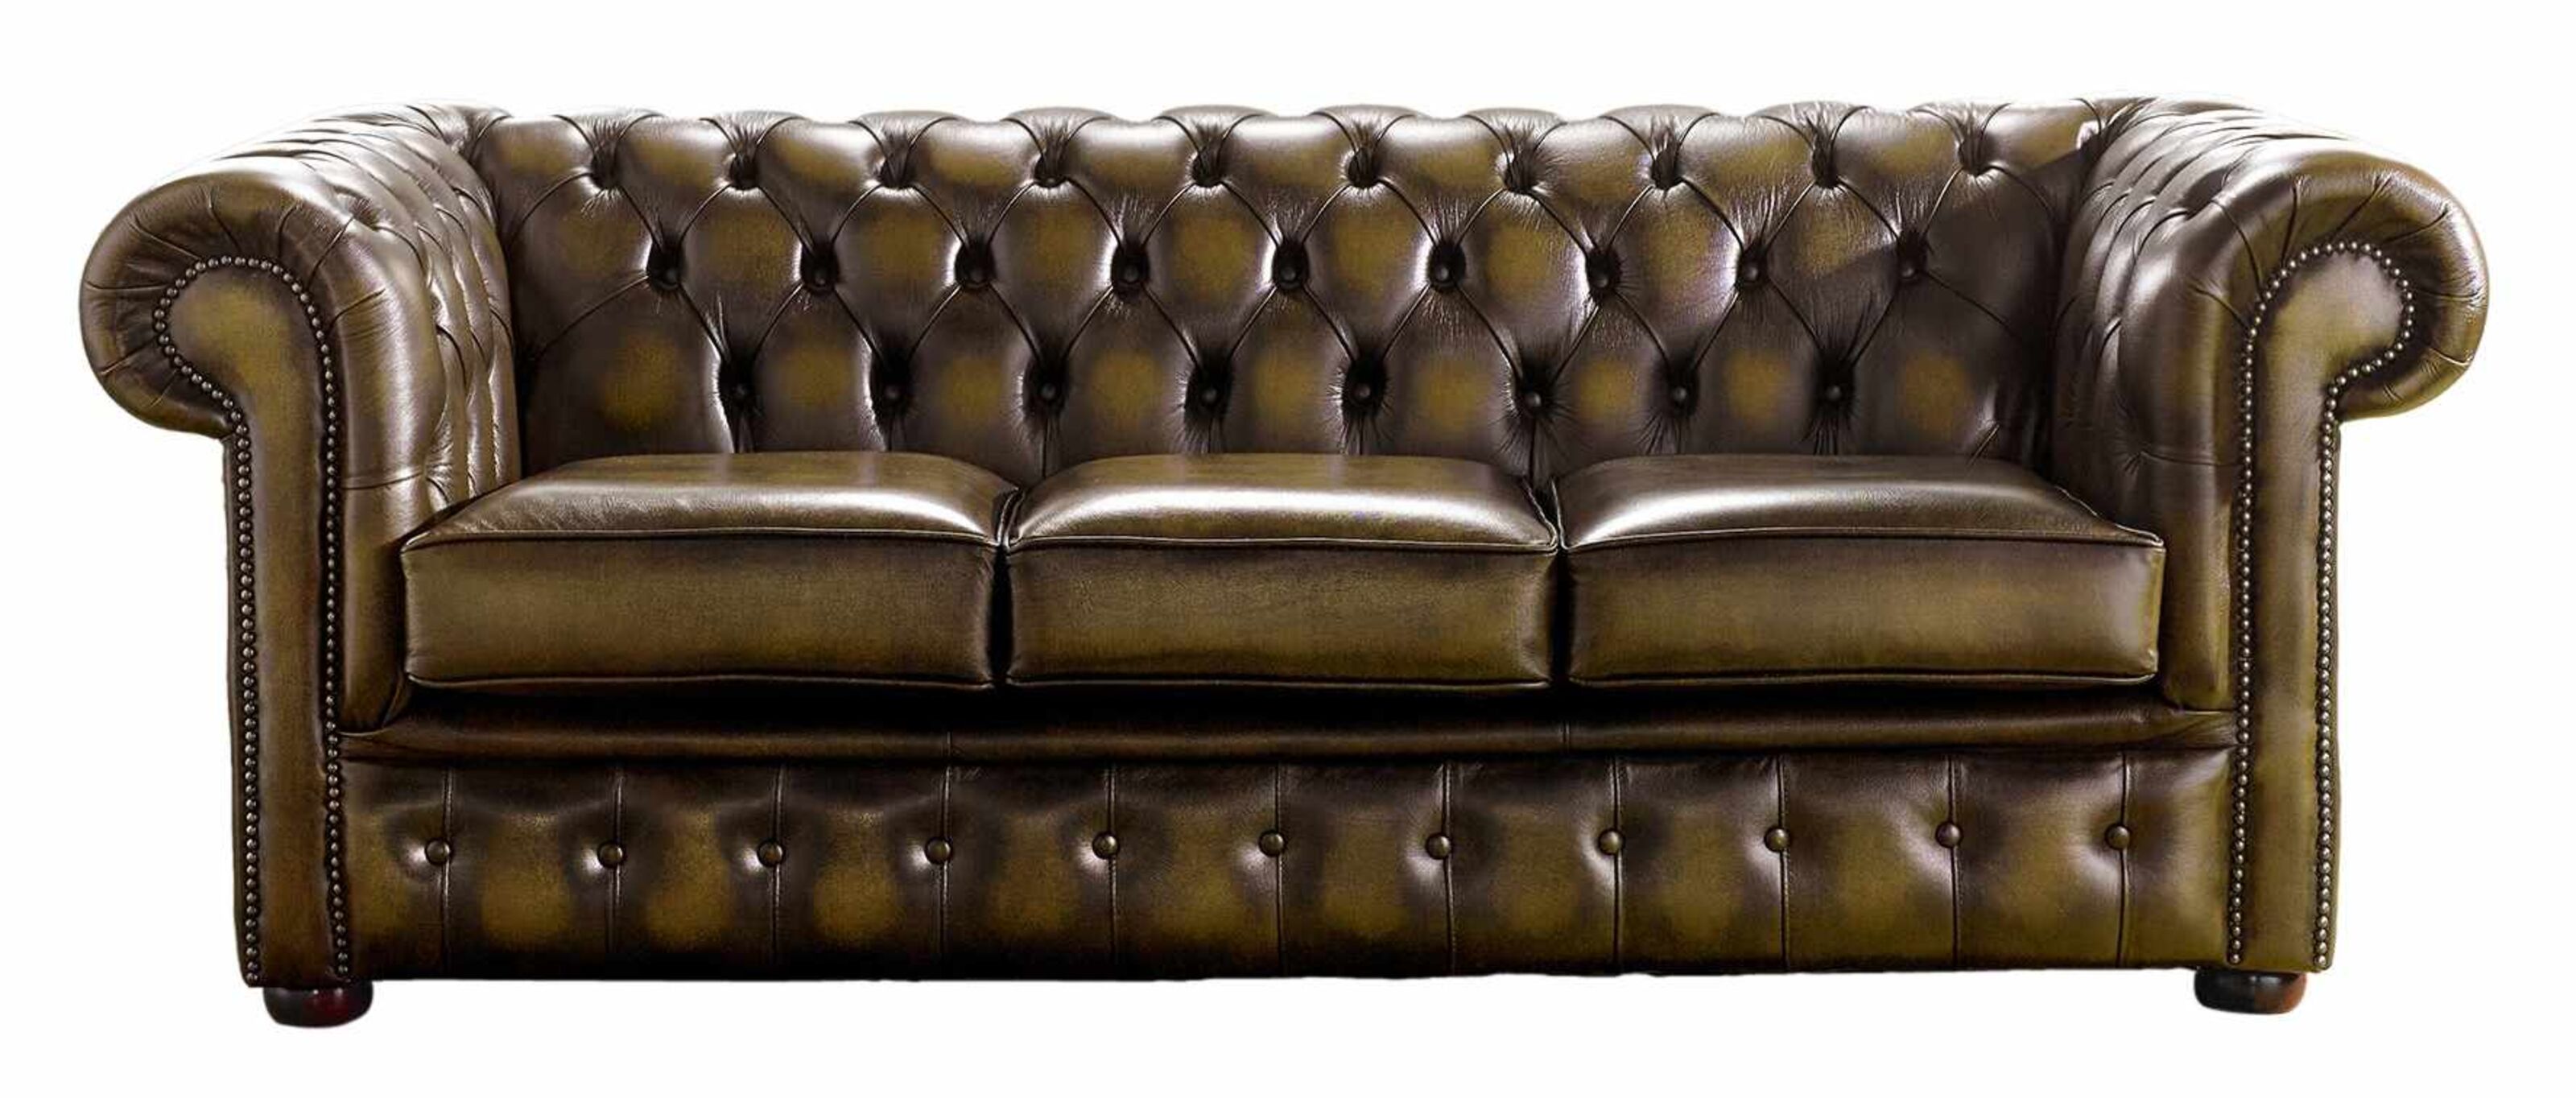 Origins of Opulence Crafting Chesterfield Sofas with Distinctive Expertise  %Post Title